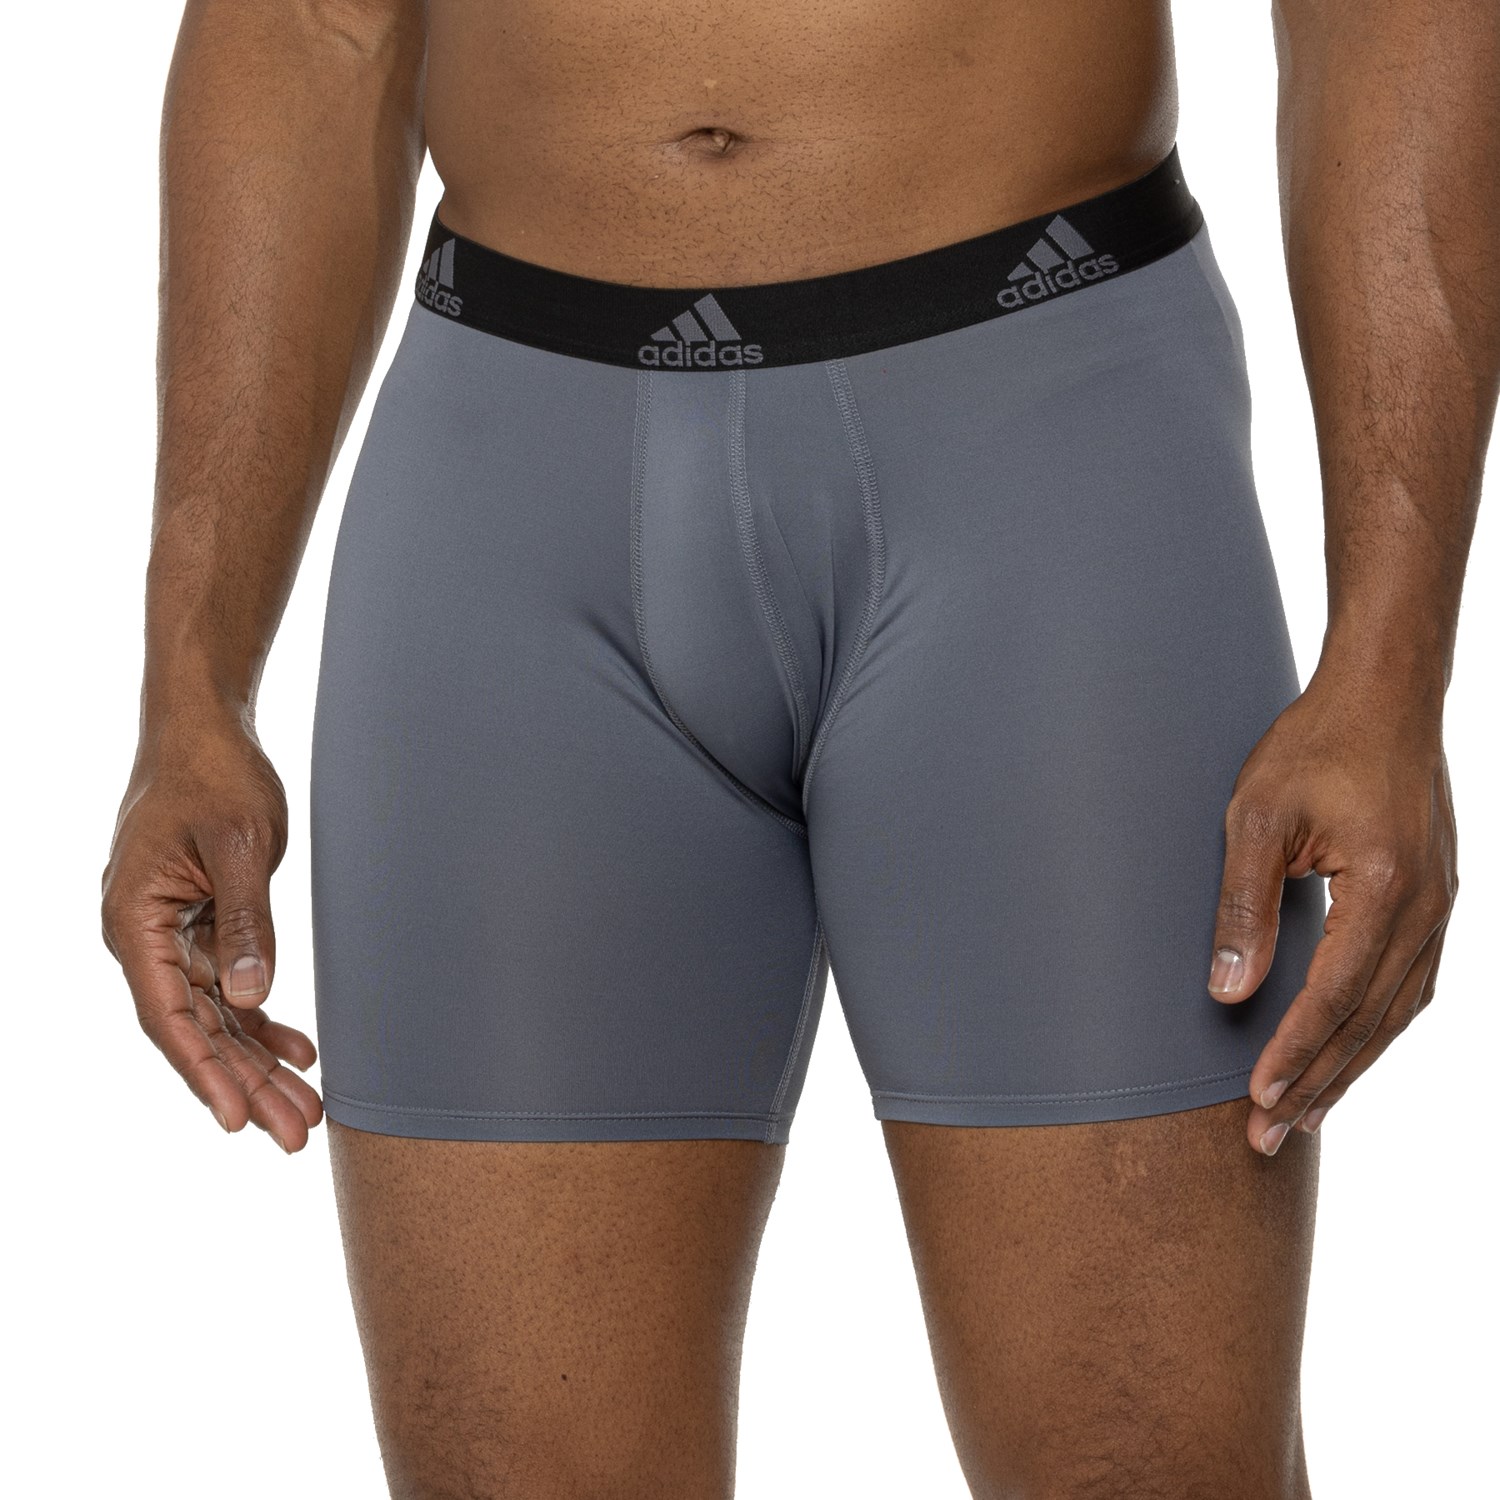 Core-Performance - adidas 3-Pack Boxer - Save Briefs 46%